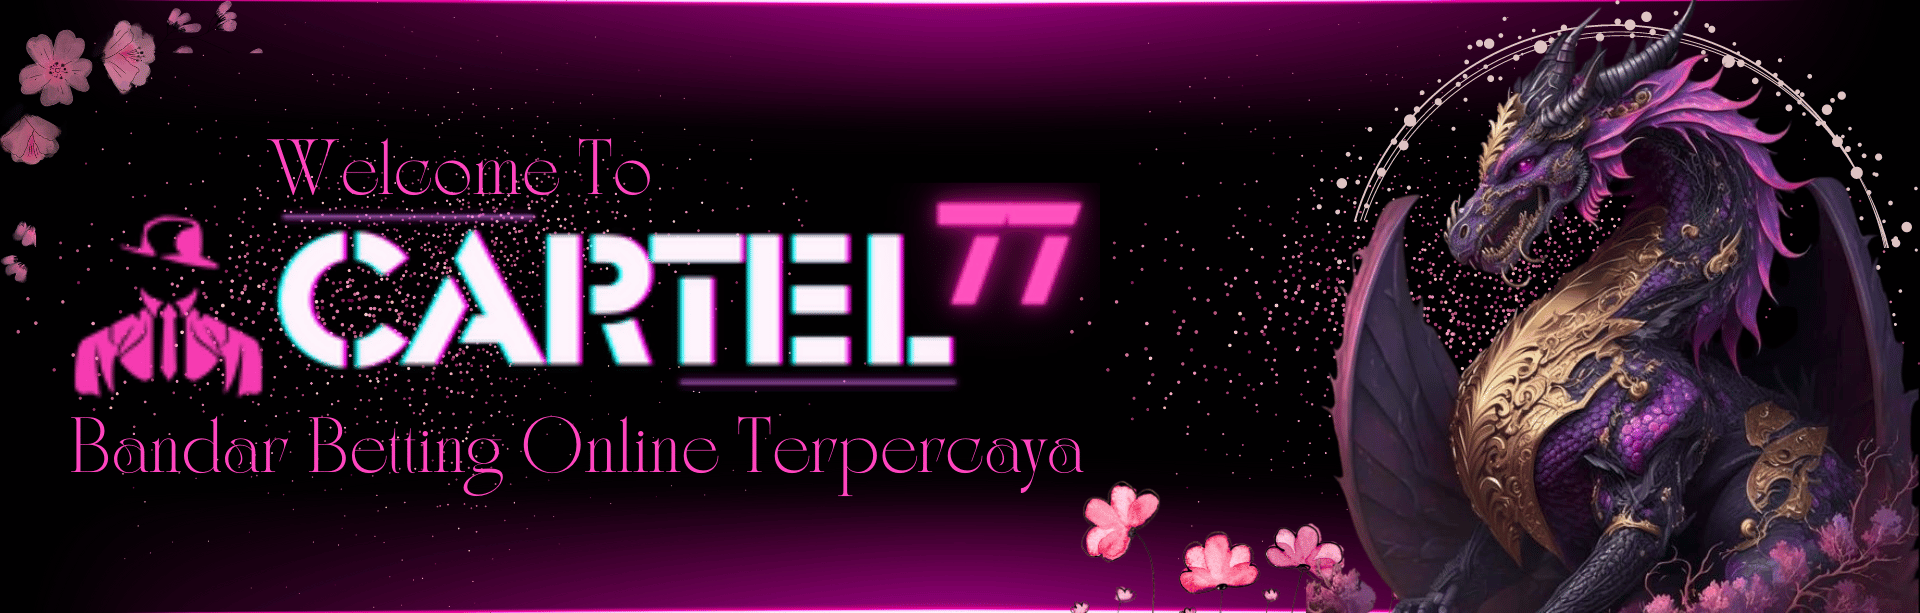 WELCOME TO CARTEL77